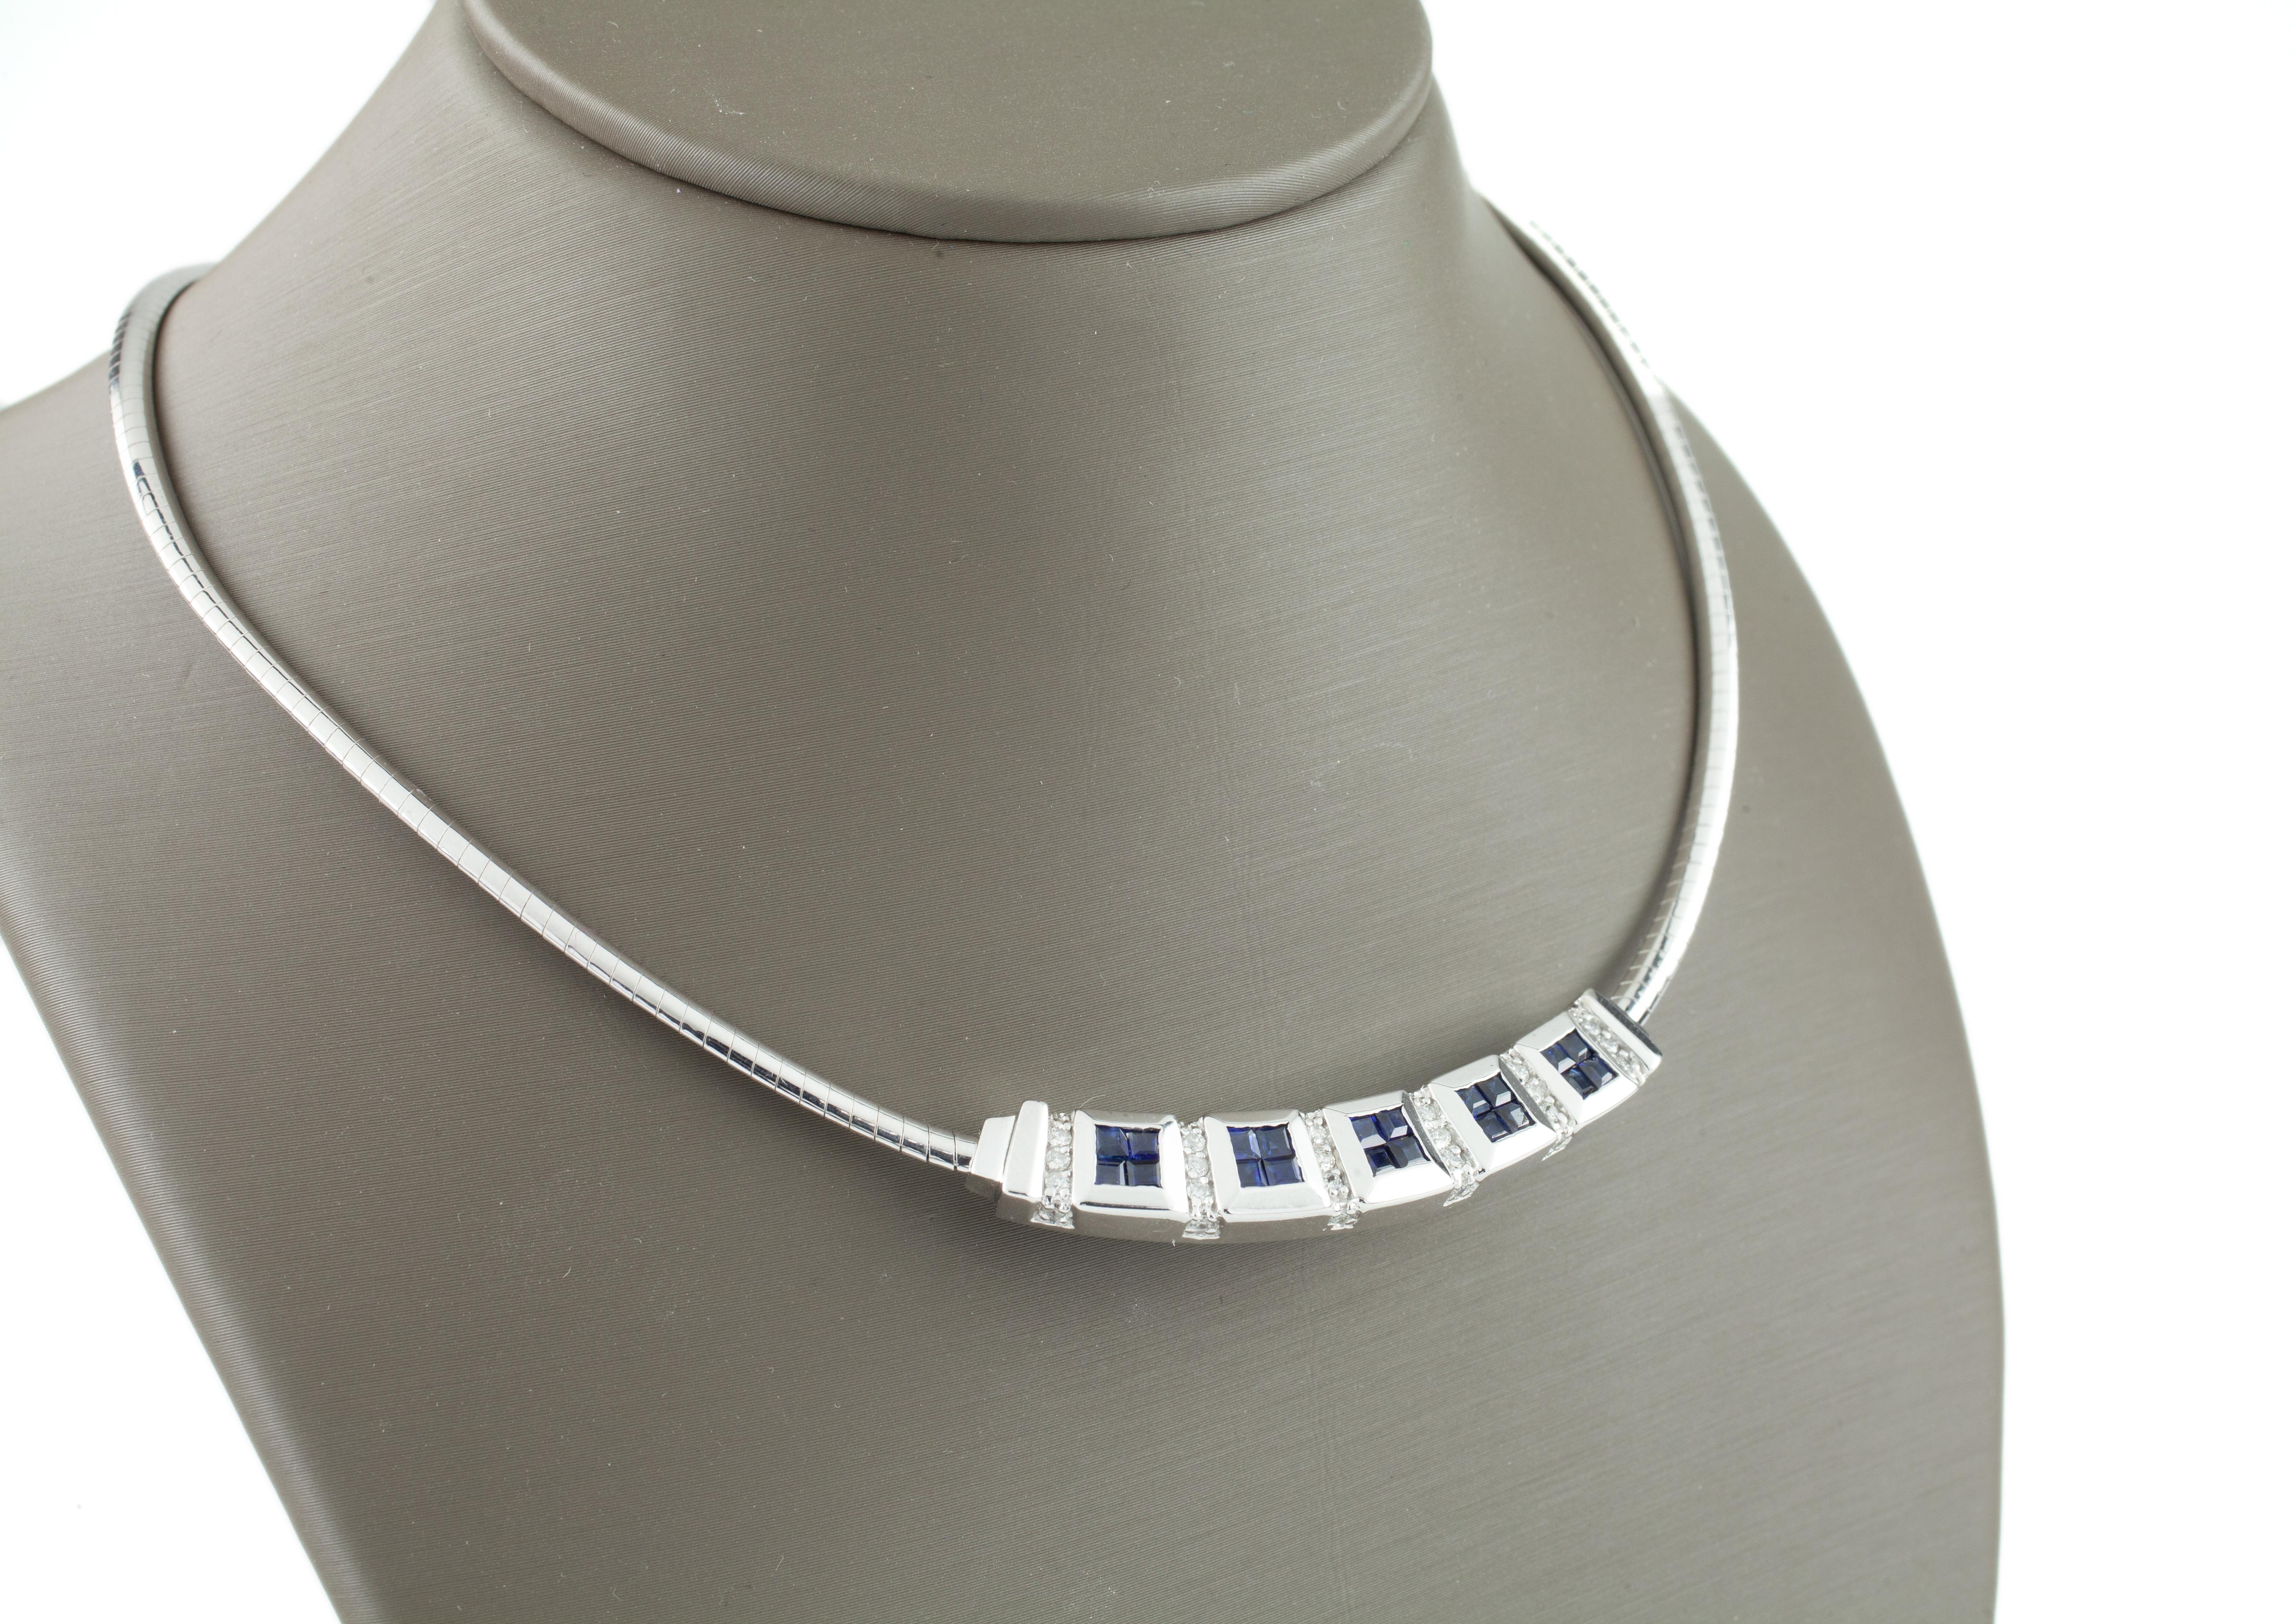 Gorgeous 14k White Gold Plaque Pendant Necklace
Plaque Features Five Stations each containing 4 princess-cut invisible set sapphires separated by a row of pave round diamonds
Total Sapphire Weight = Approximately 4 carats
Total Diamond Weight =